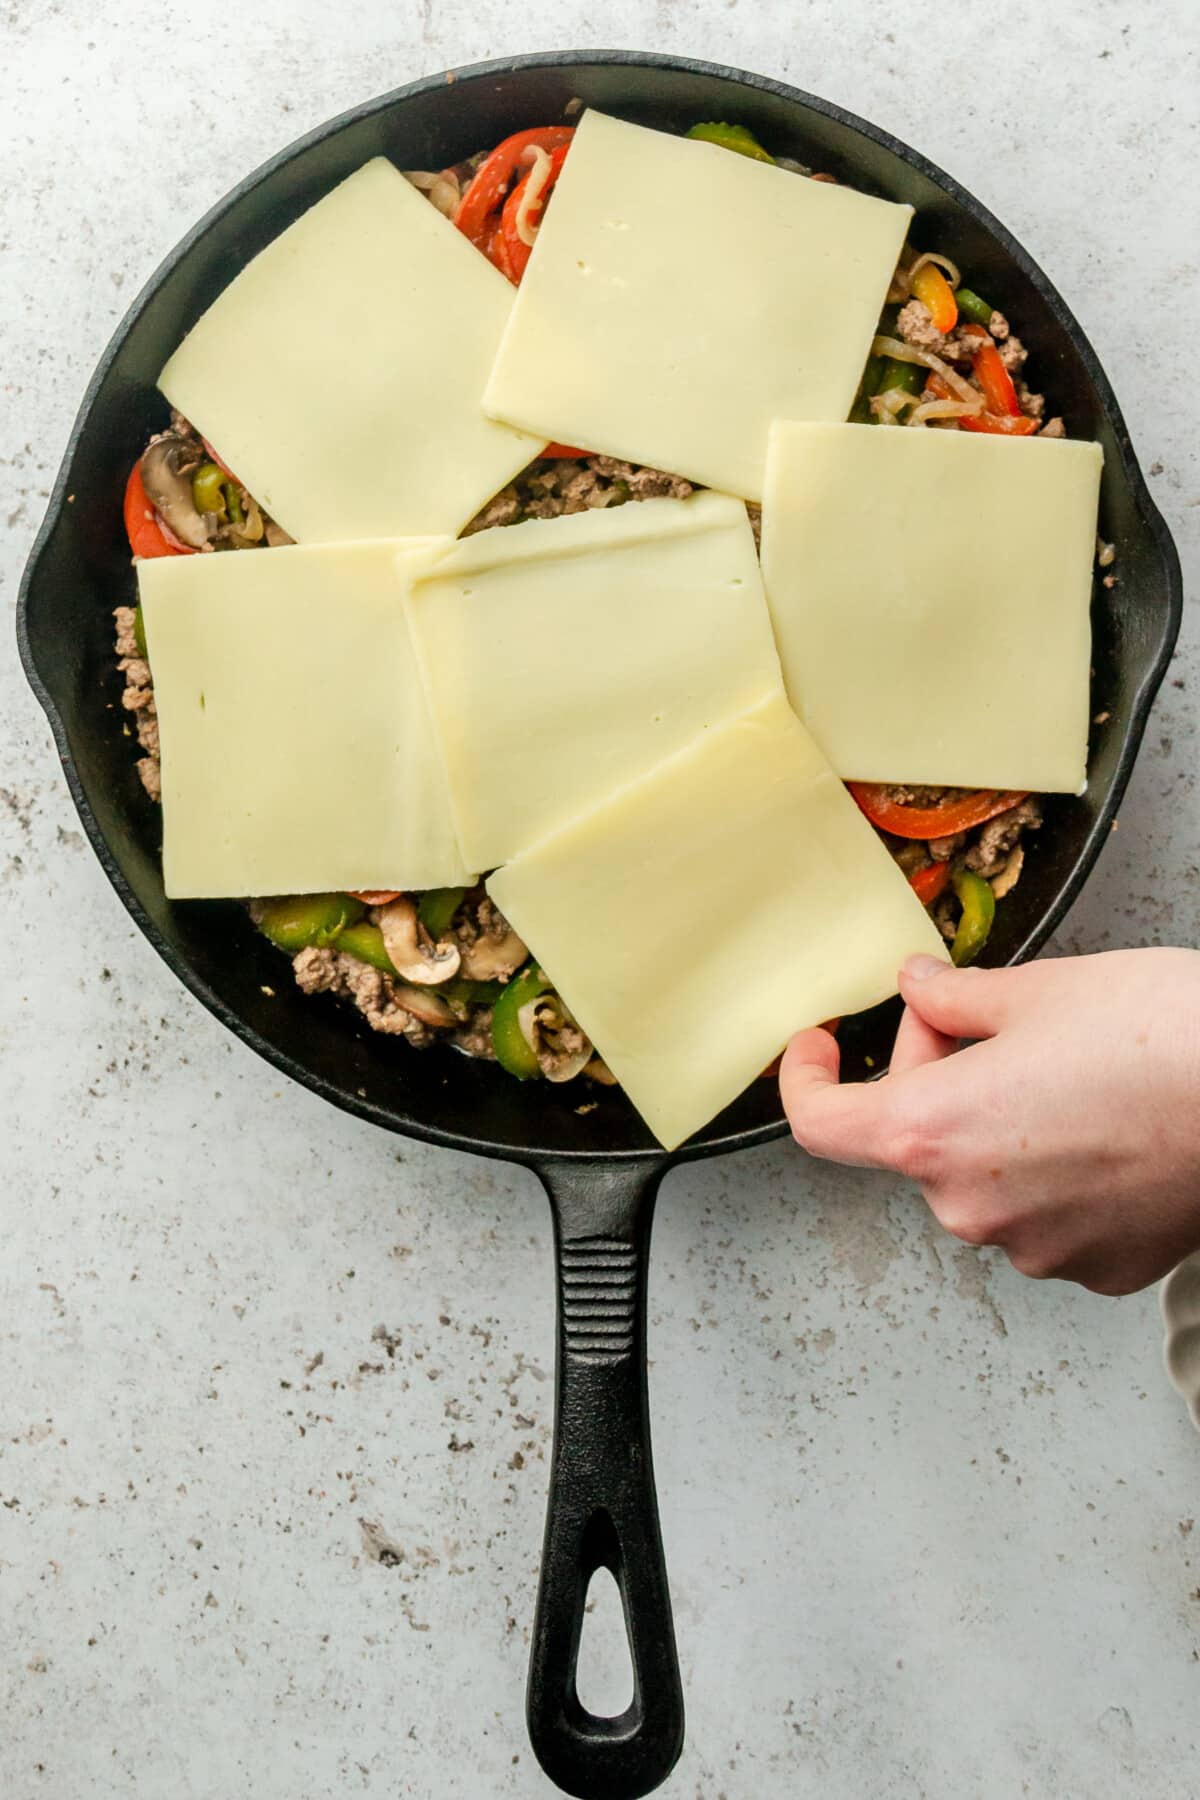 Slices of cheese are laid over minced beef and vegetables in a cast iron skillet on a light grey colored surface.